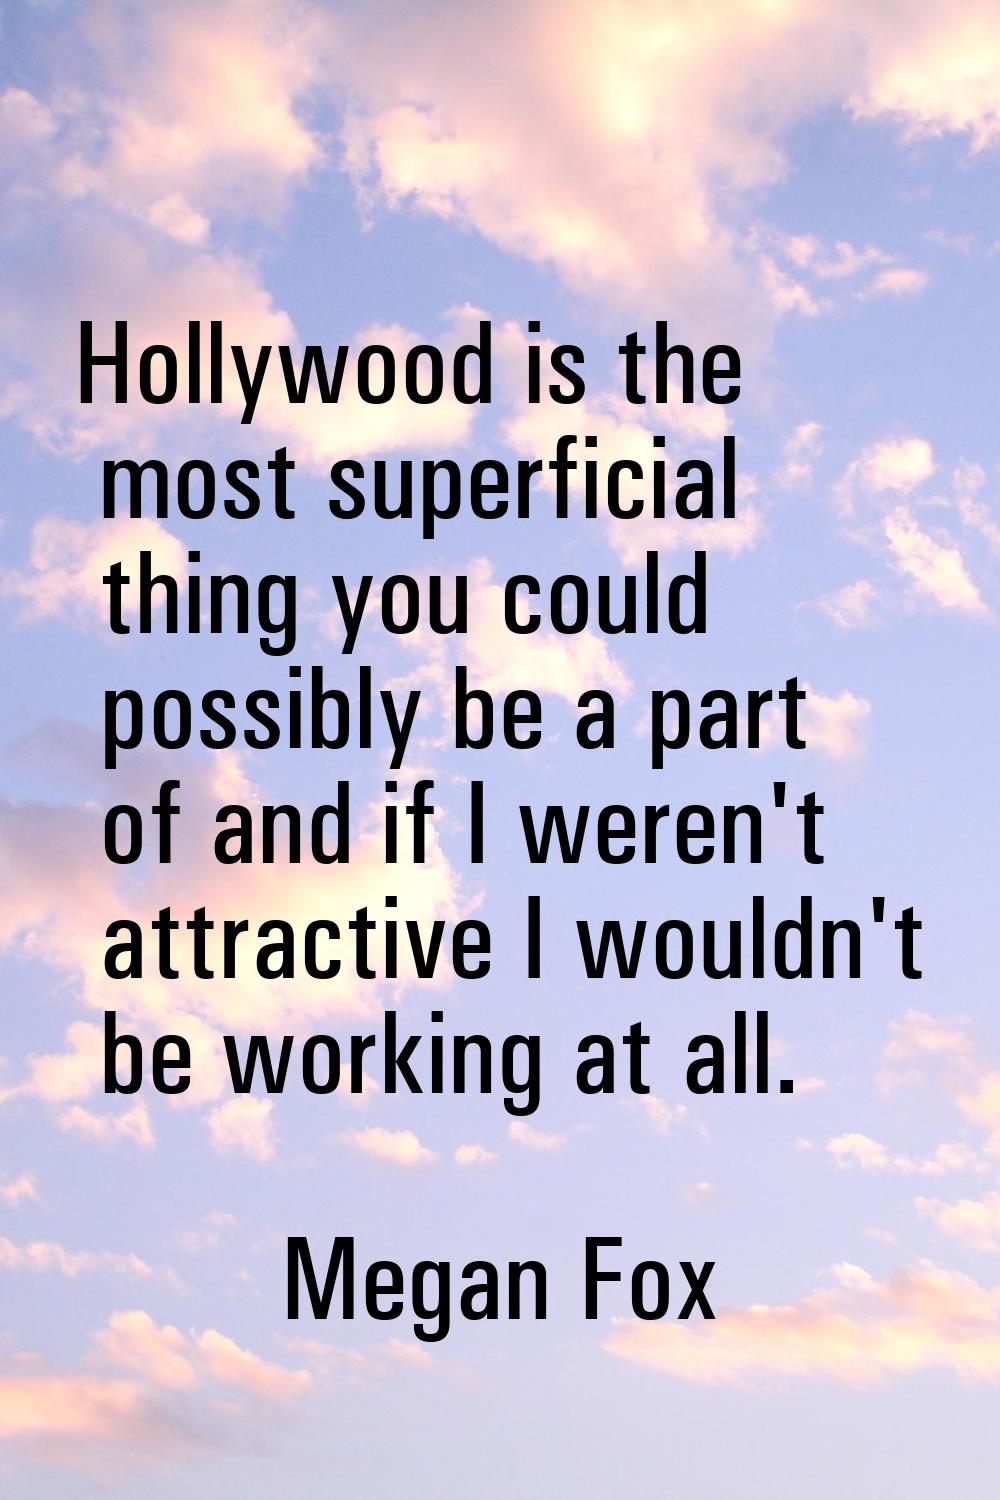 Hollywood is the most superficial thing you could possibly be a part of and if I weren't attractive